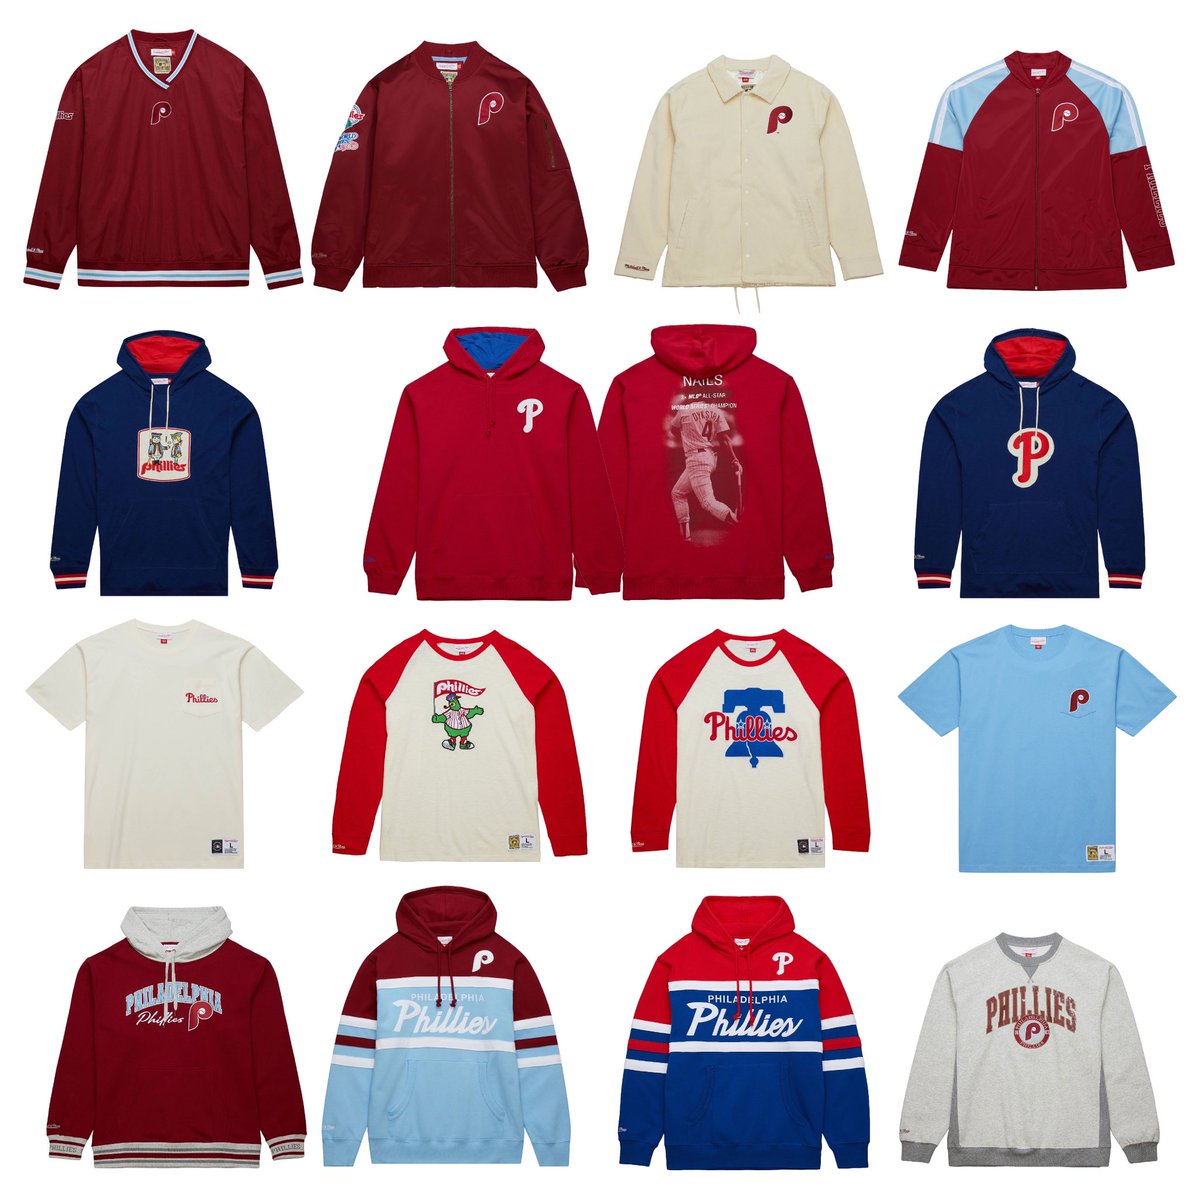 The Fightins ❤️⚾️ We are ready for the baseball season here at Mitchell & Ness, especially for our hometown @Phillies NEW @mitchell_ness Phillies Apparel is available NOW in limited quantities! Come get geared up for opening day with us.